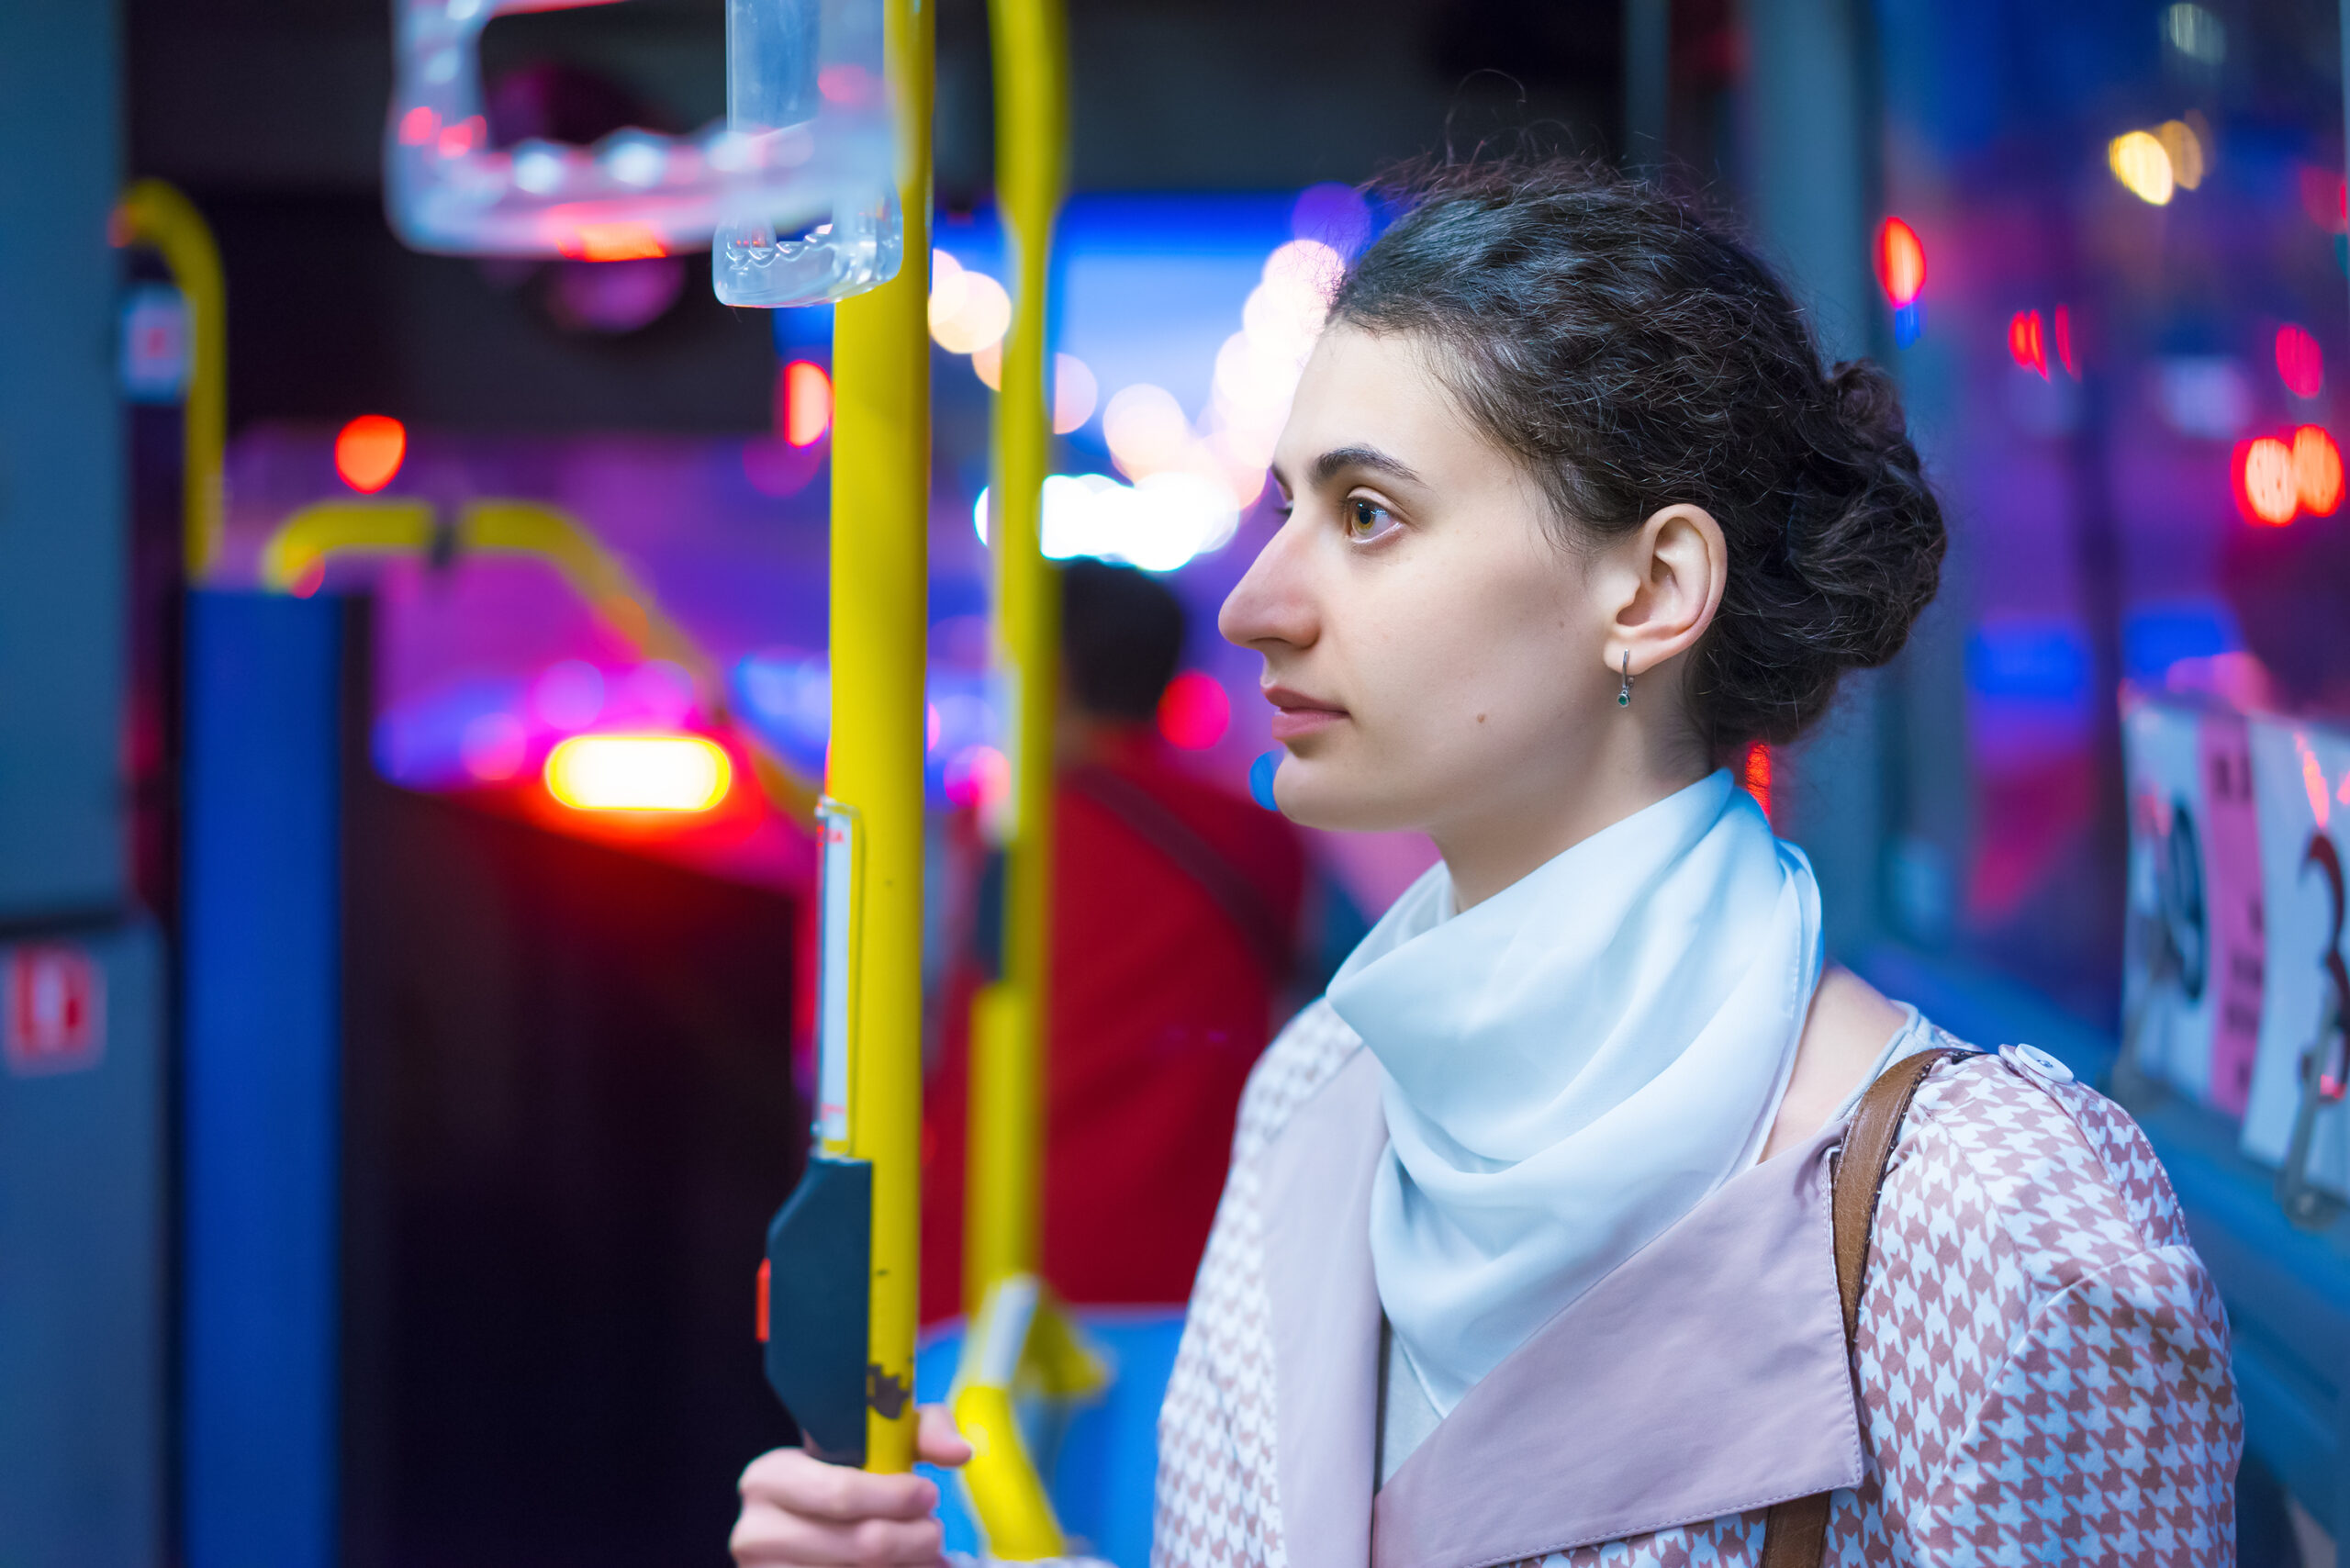 Woman on bus at night